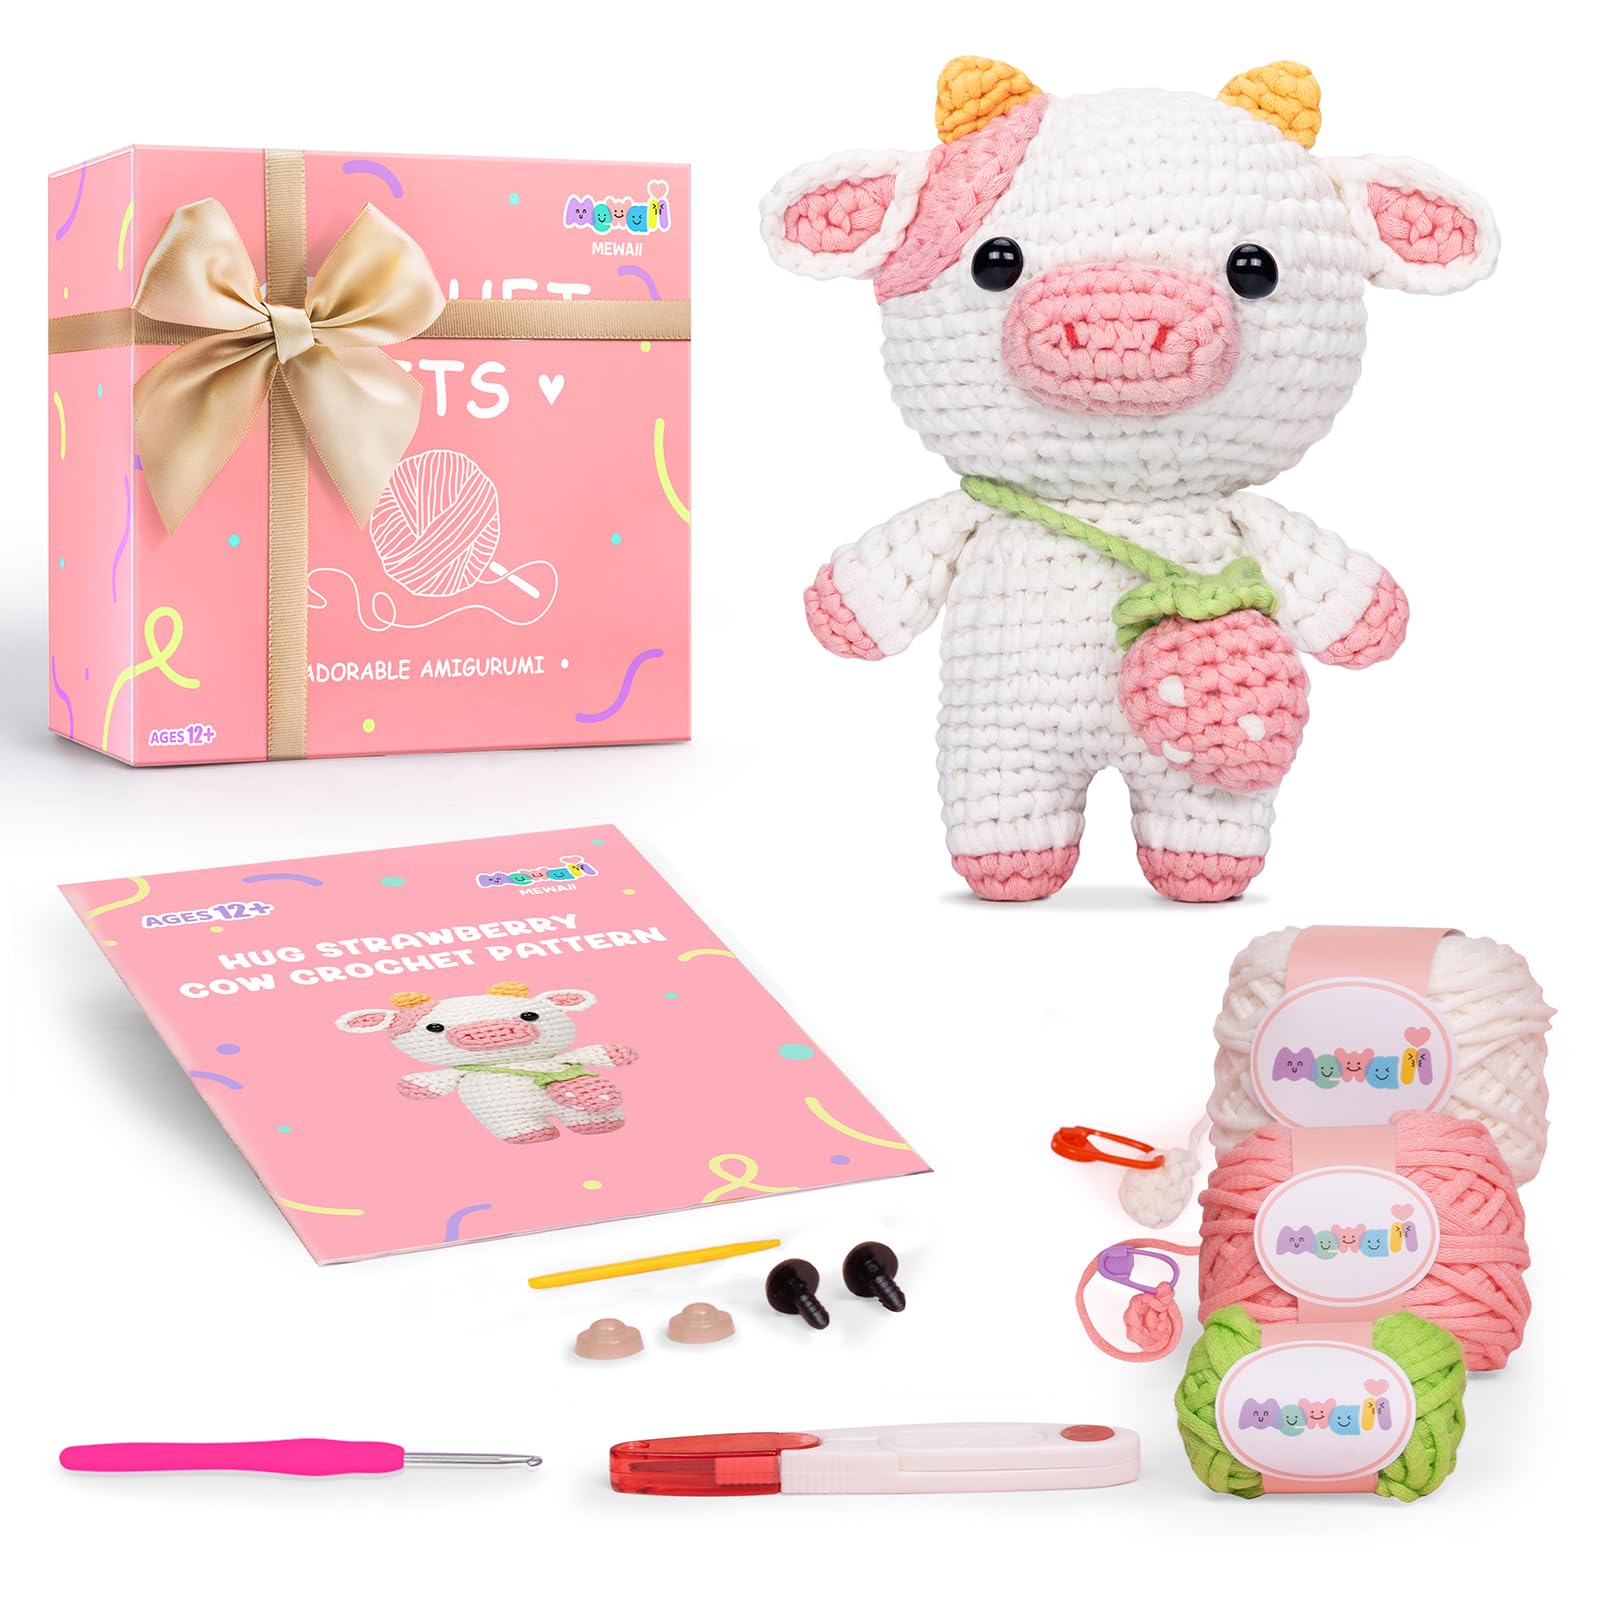 Mewaii Crochet Kit for Beginners, Complete DIY Kit Animals with 40%+ Pre-Started Tape Yarn Step-by-Step Video Tutorials for Adults Kids